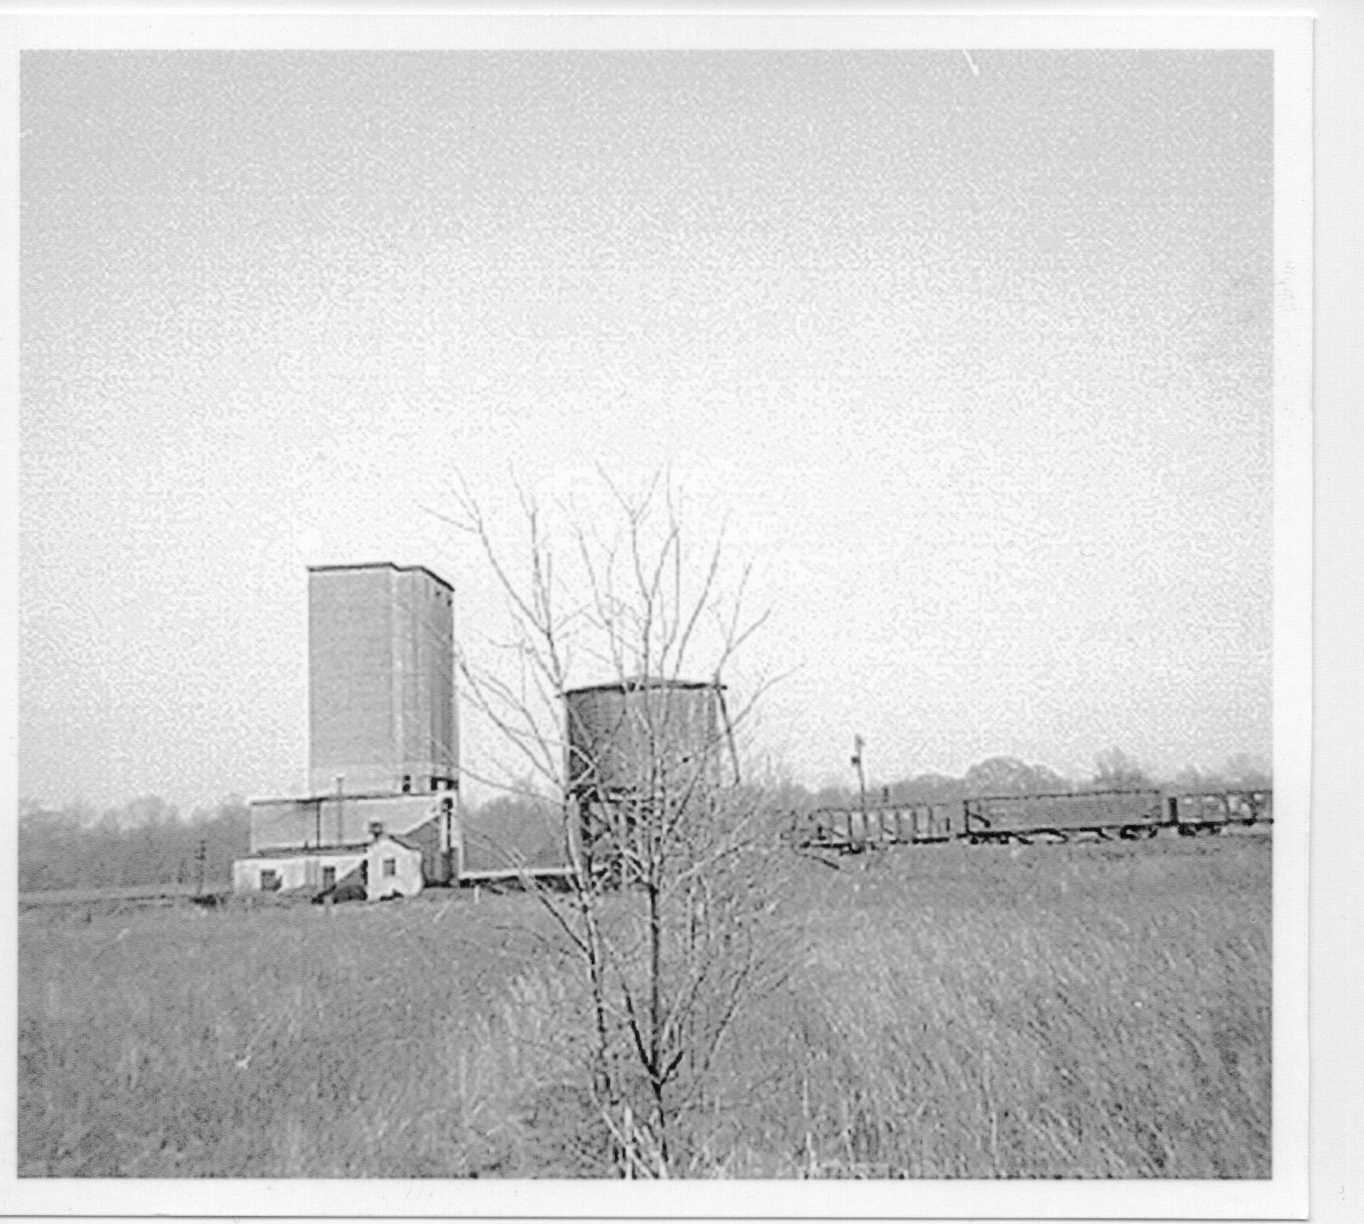 ICRR Coal Chute & Water Tower @ Reevesville, IL